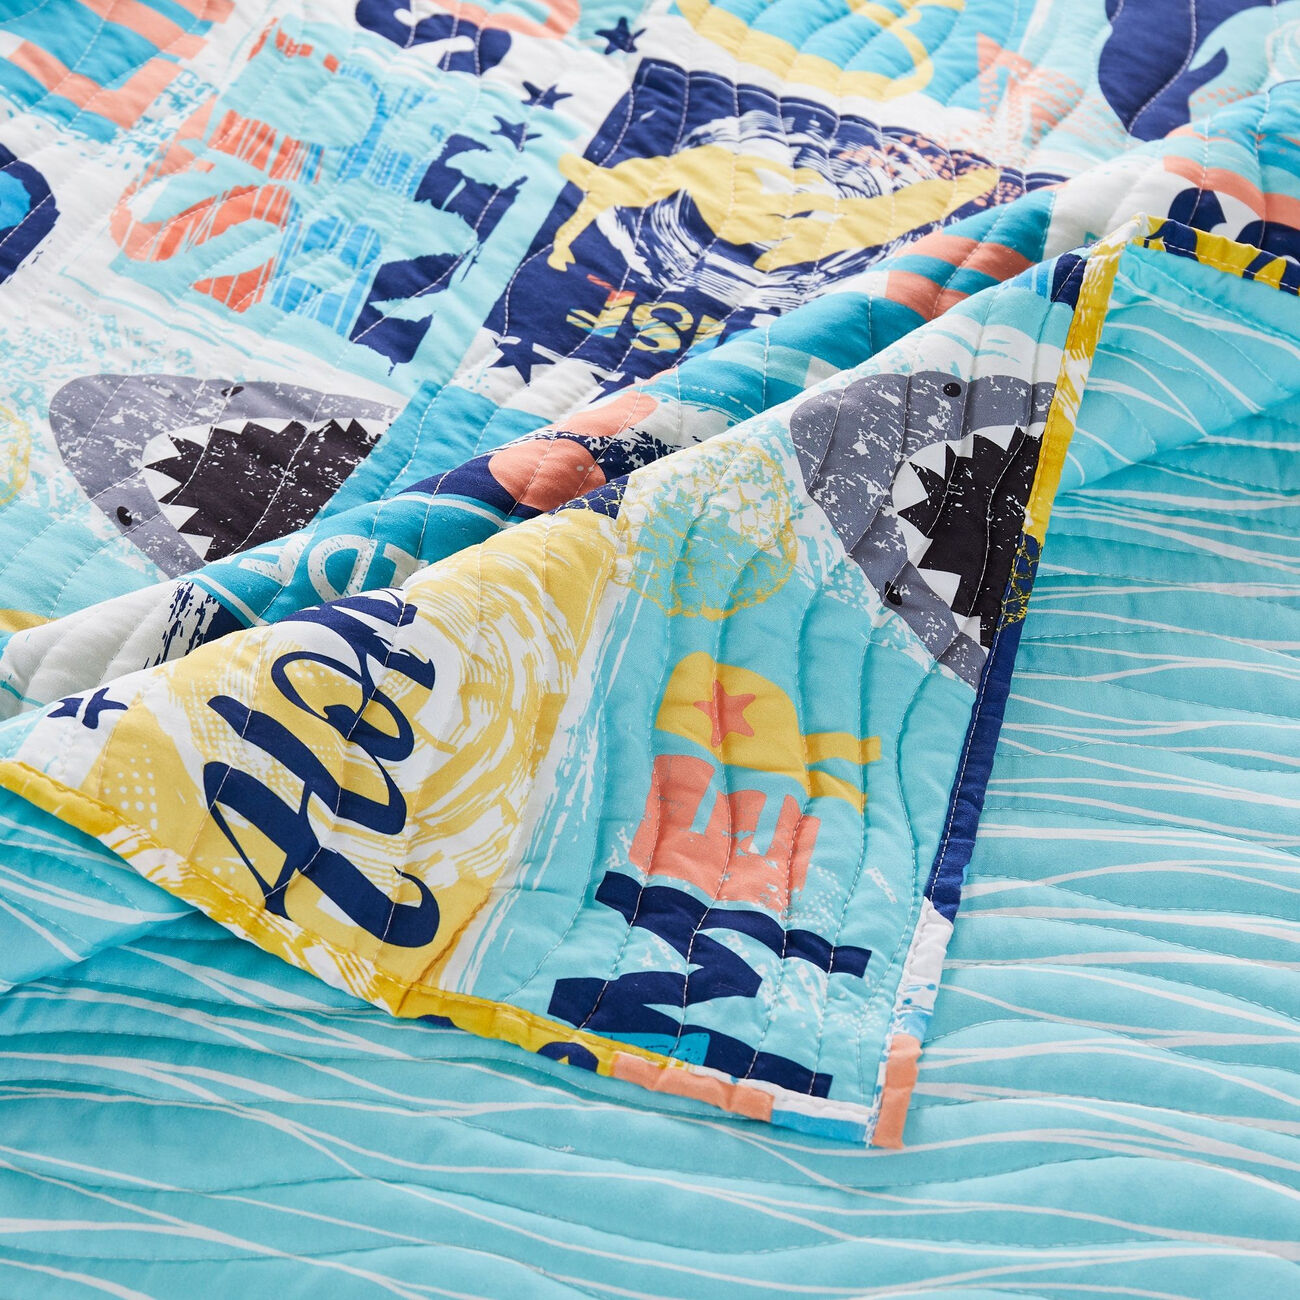 Naples 2 Piece Microfiber Beach Print and Typography Twin Quilt Set, Blue